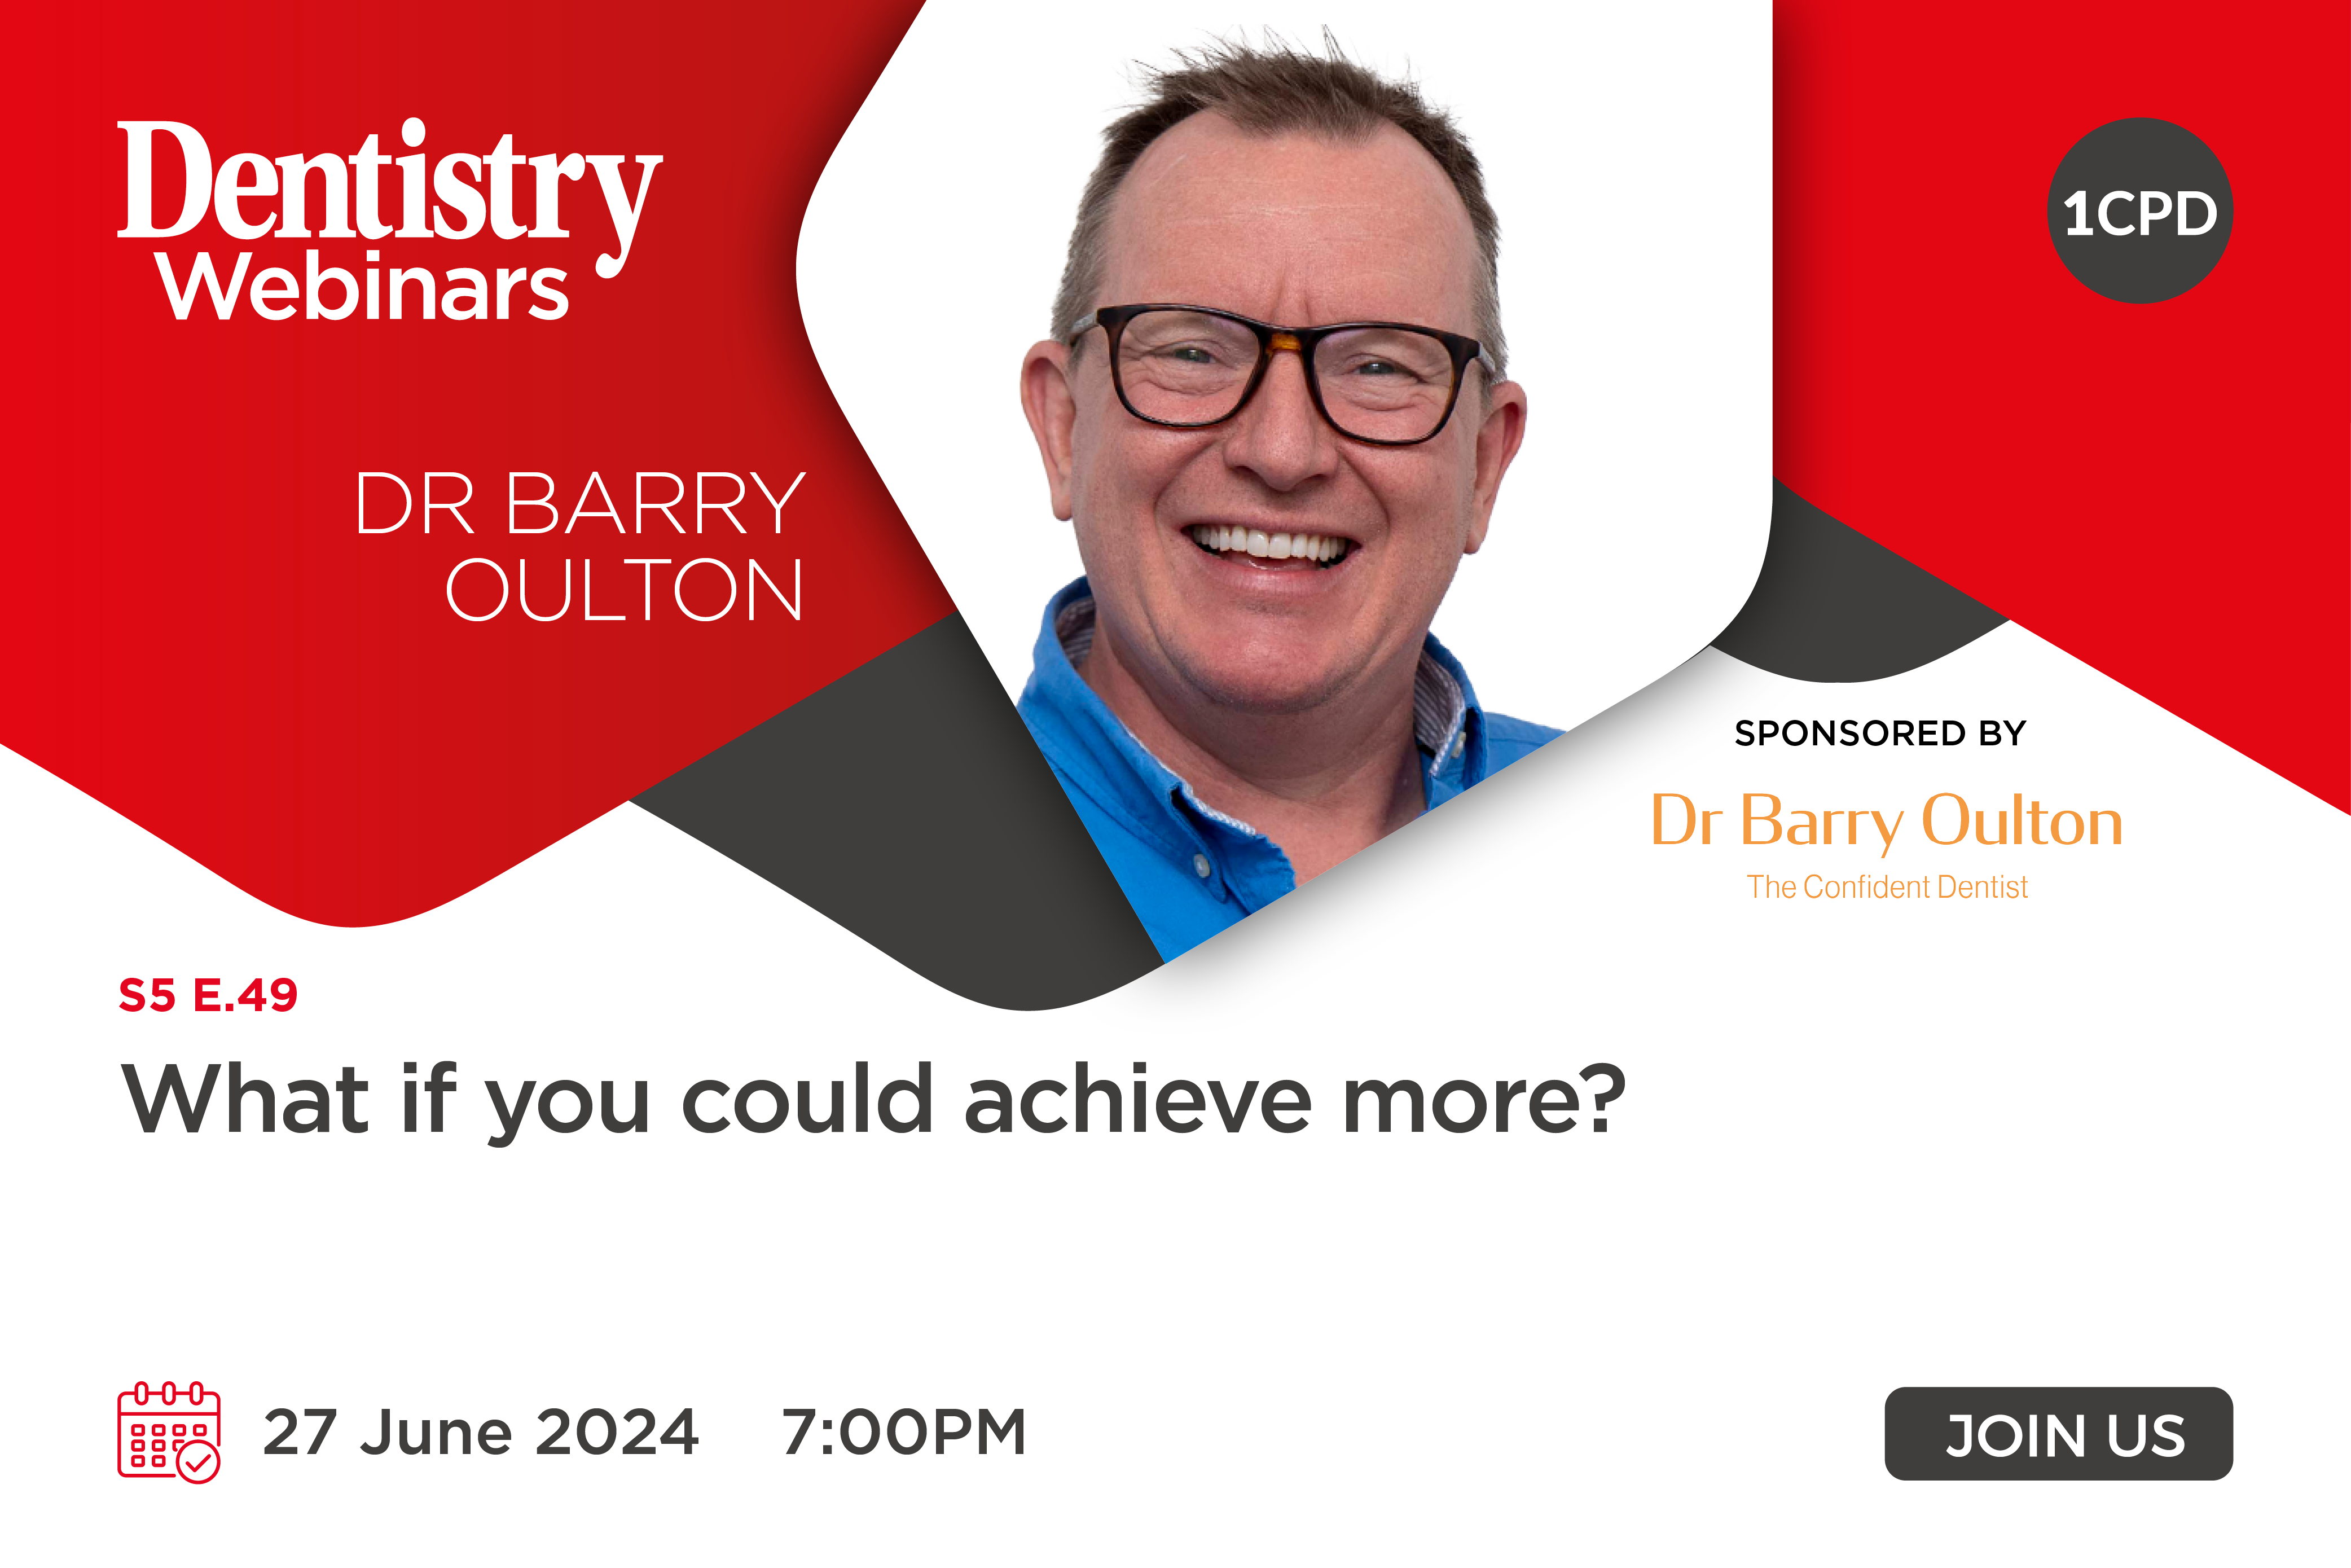 Join Barry Oulton on Thursday 27 June at 7pm as he discusses how you can achieve more time, more money and more fun in your career.